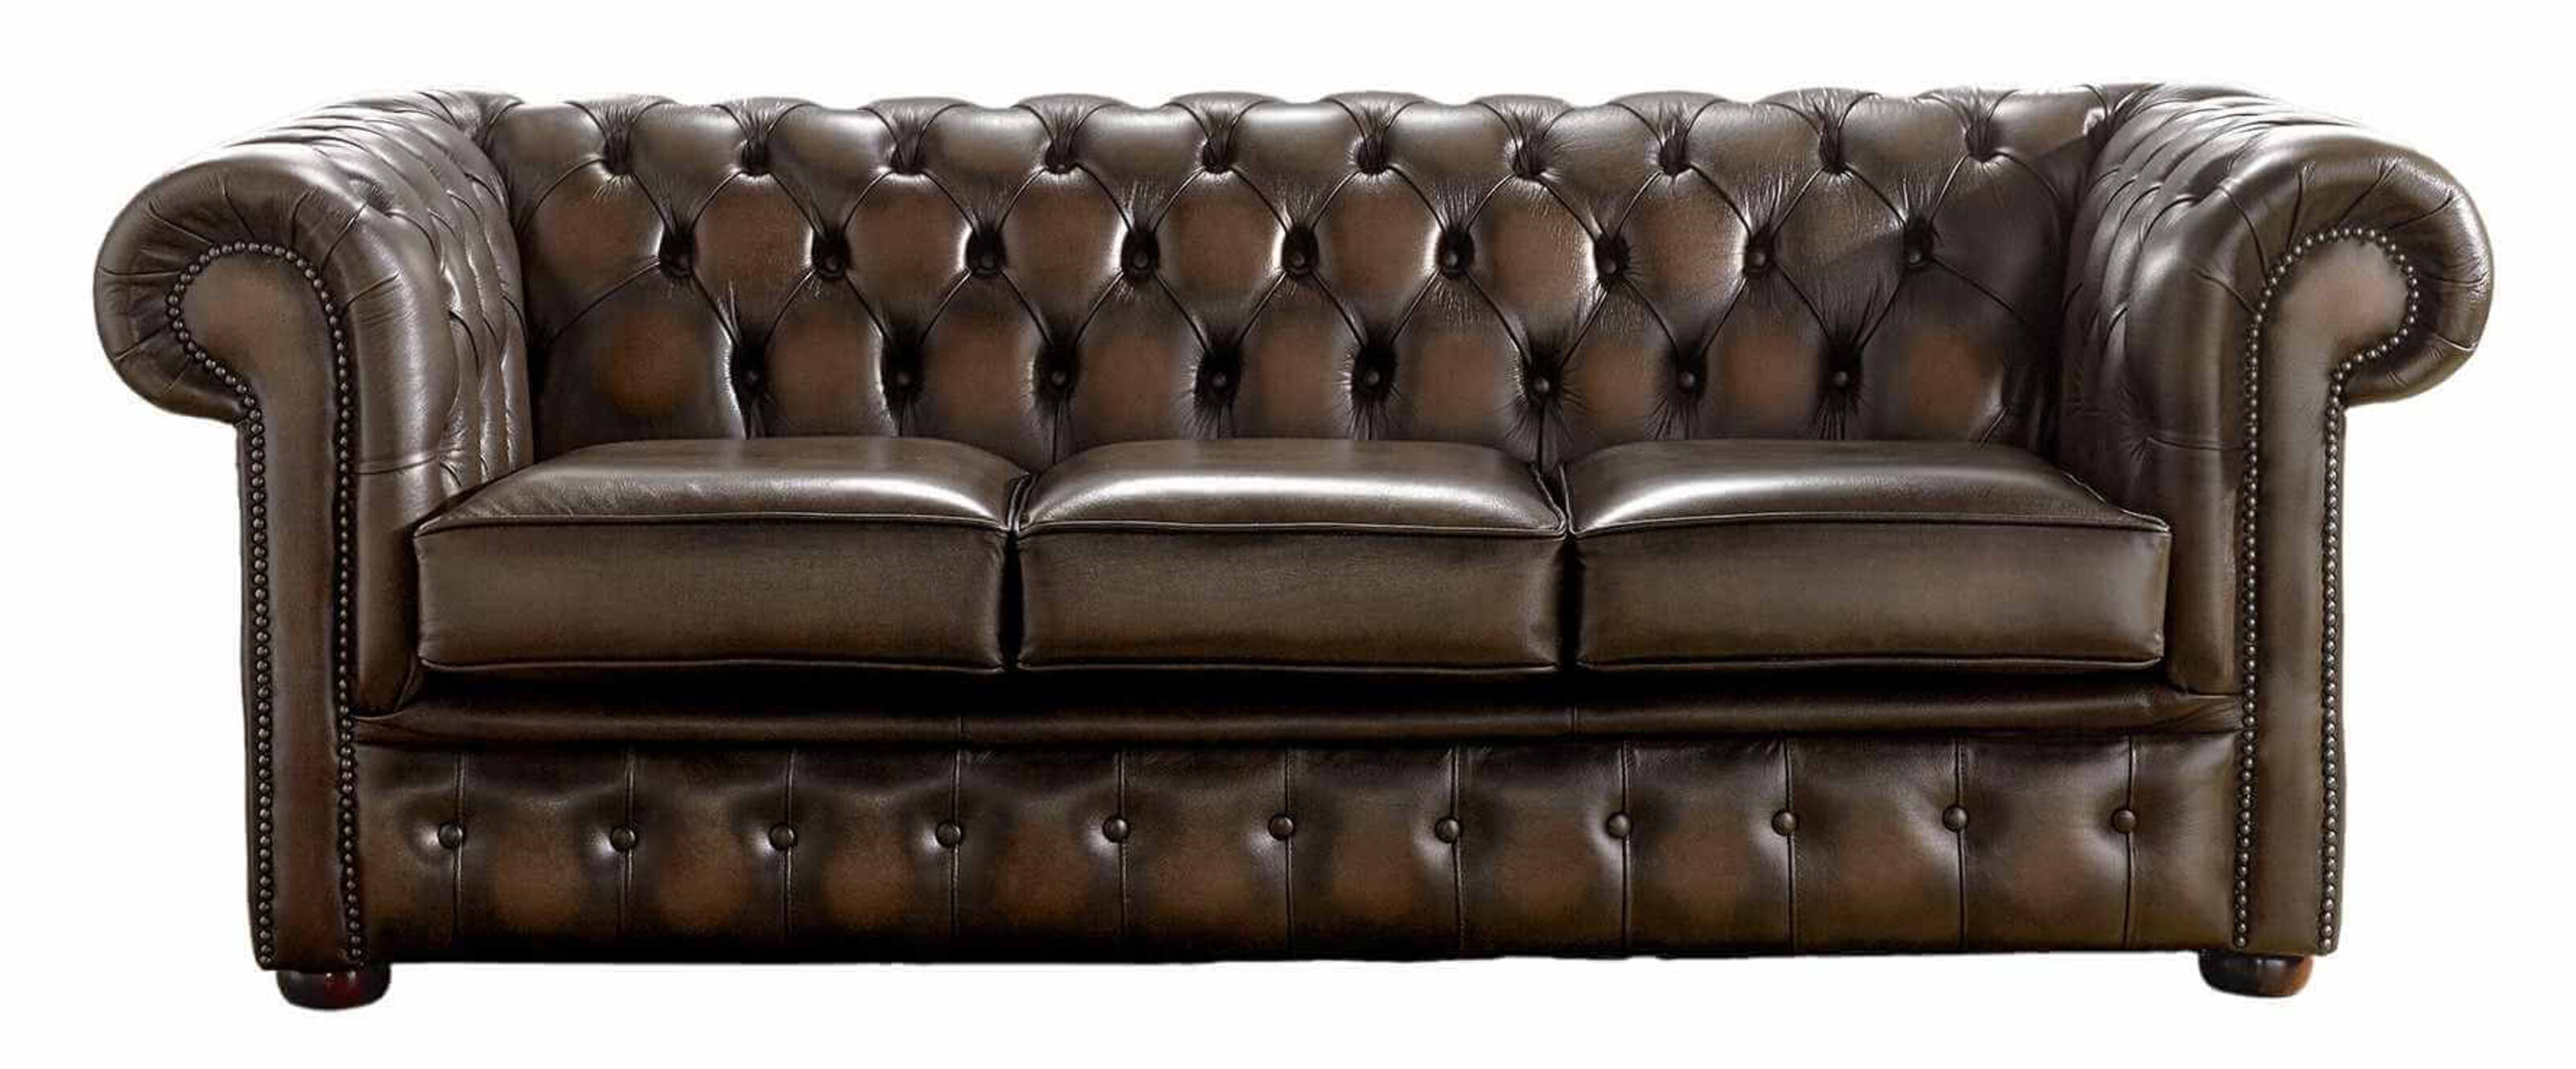 Explore Elegance Chesterfield Sofas Available on Amazon  %Post Title